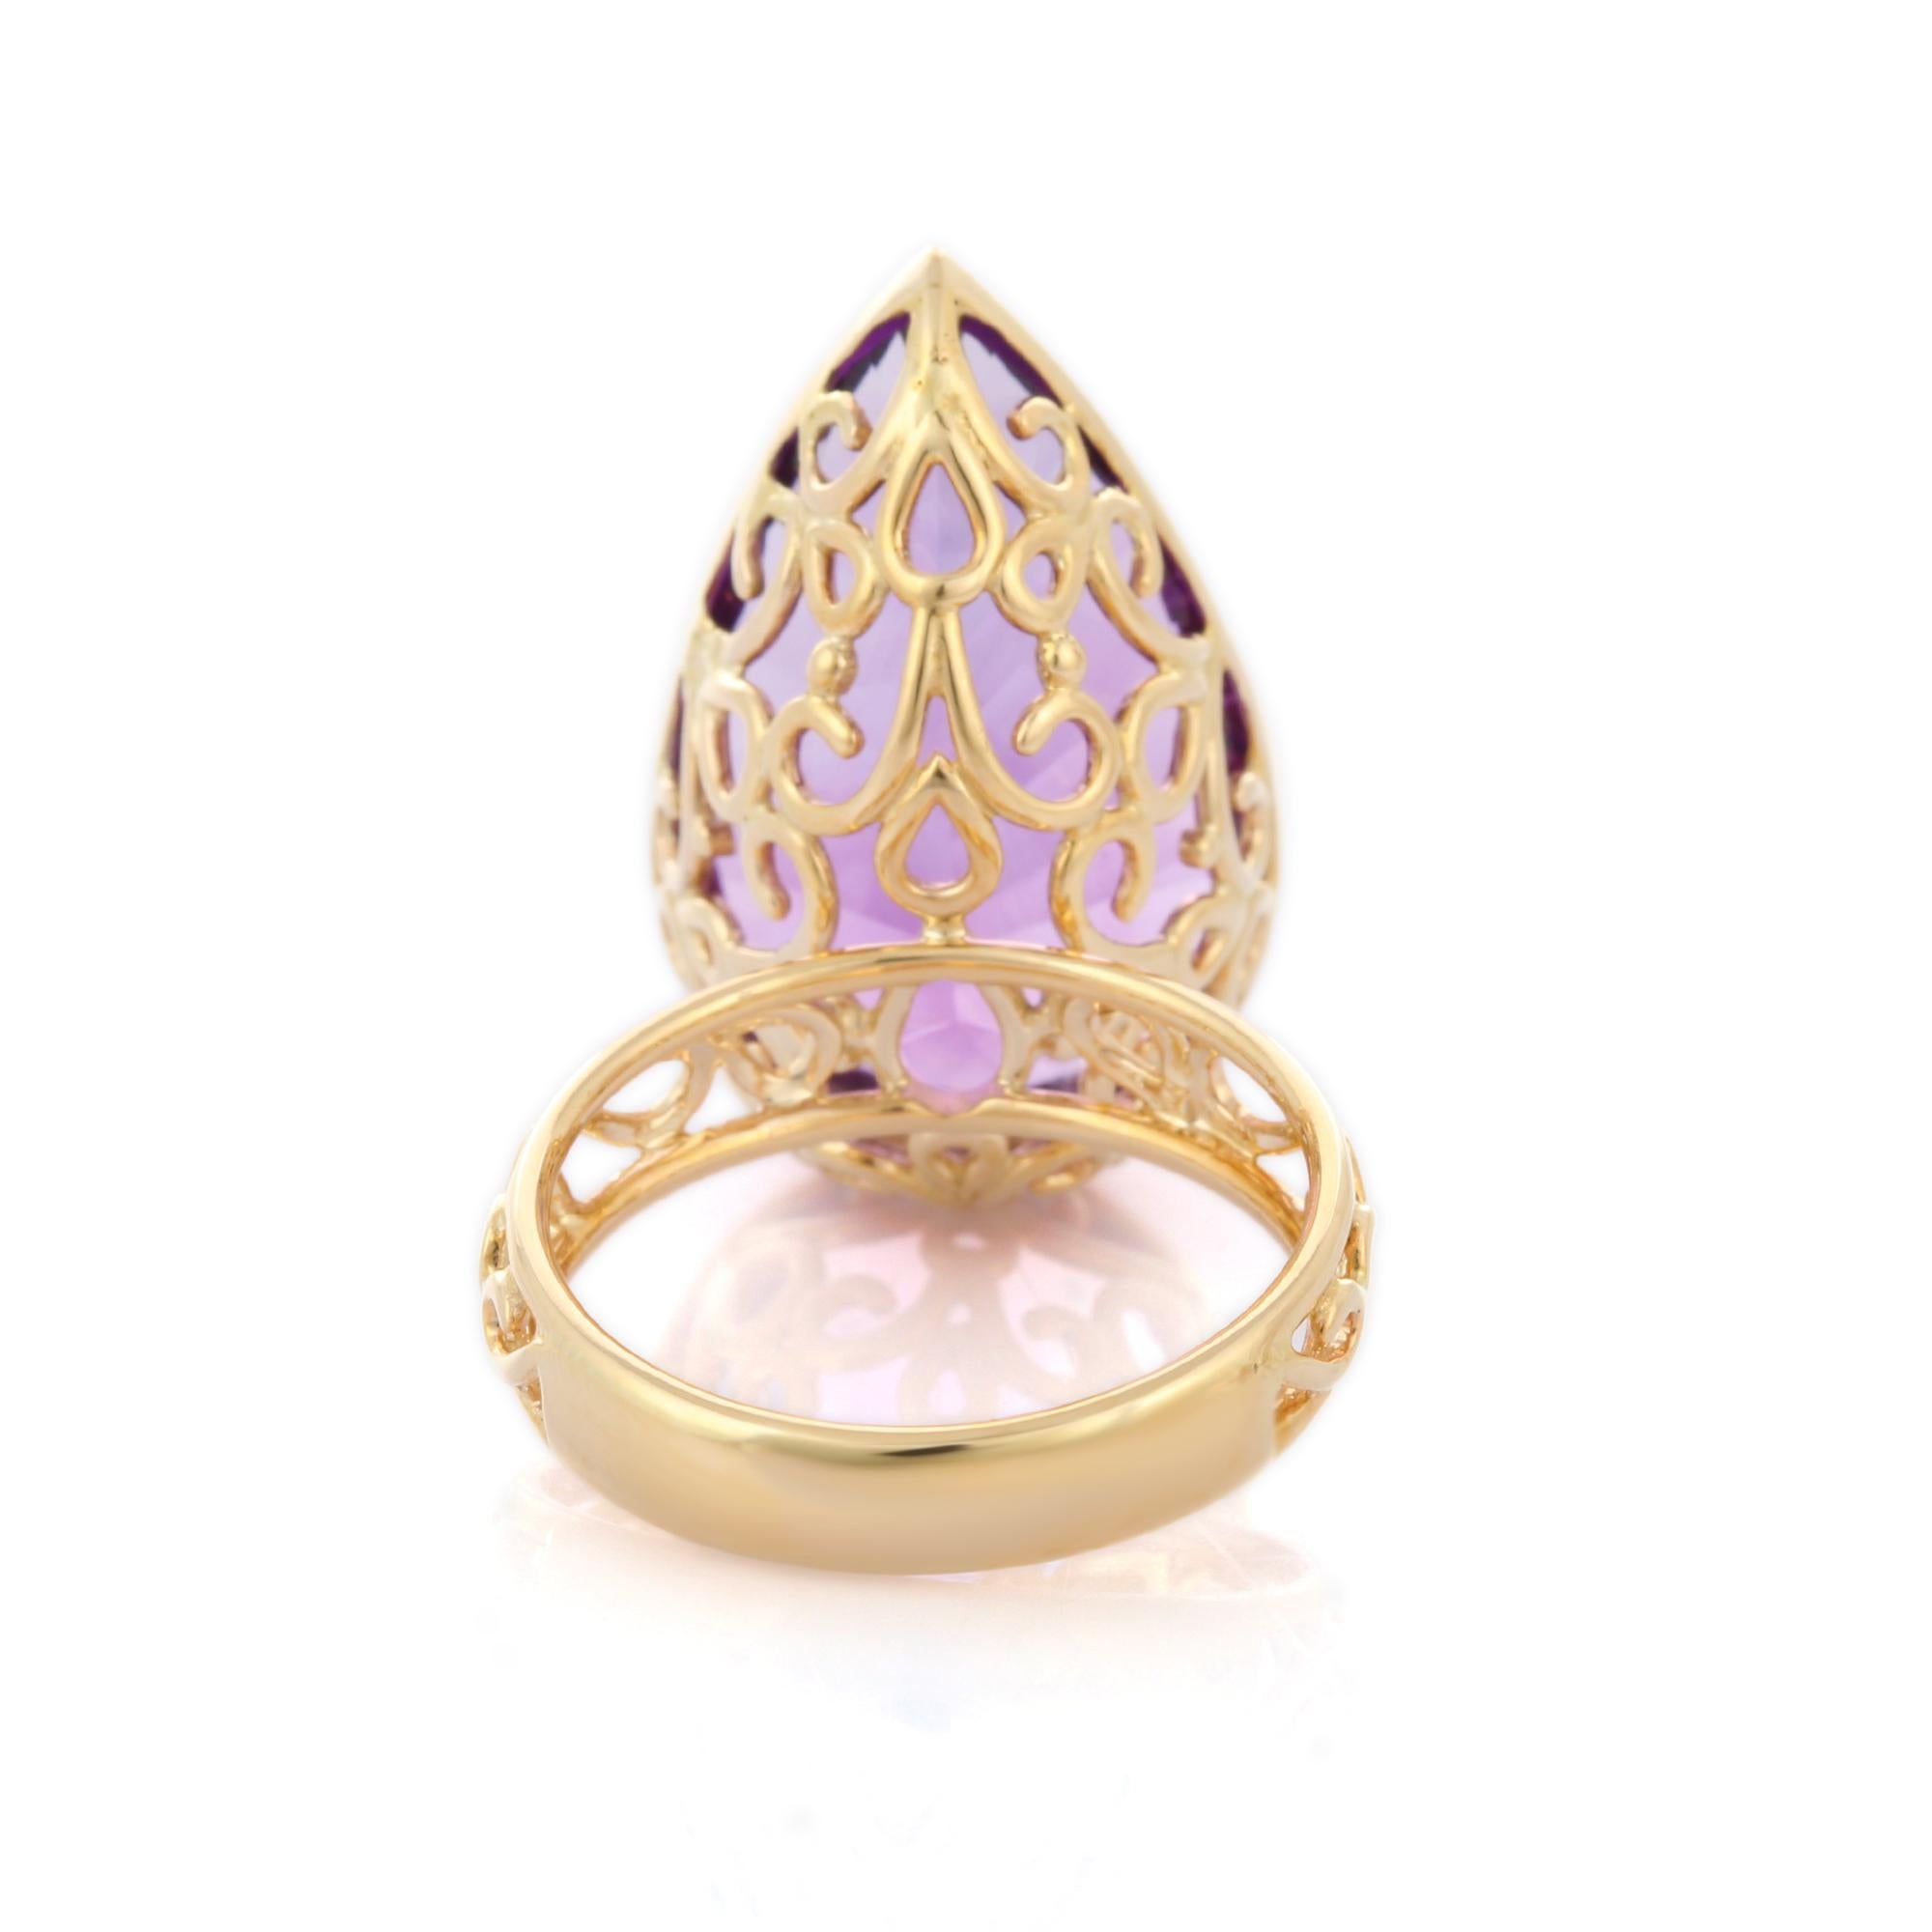 For Sale:  18.2 Carat Pear Cut Amethyst Cocktail Ring in 14K Yellow Gold 5